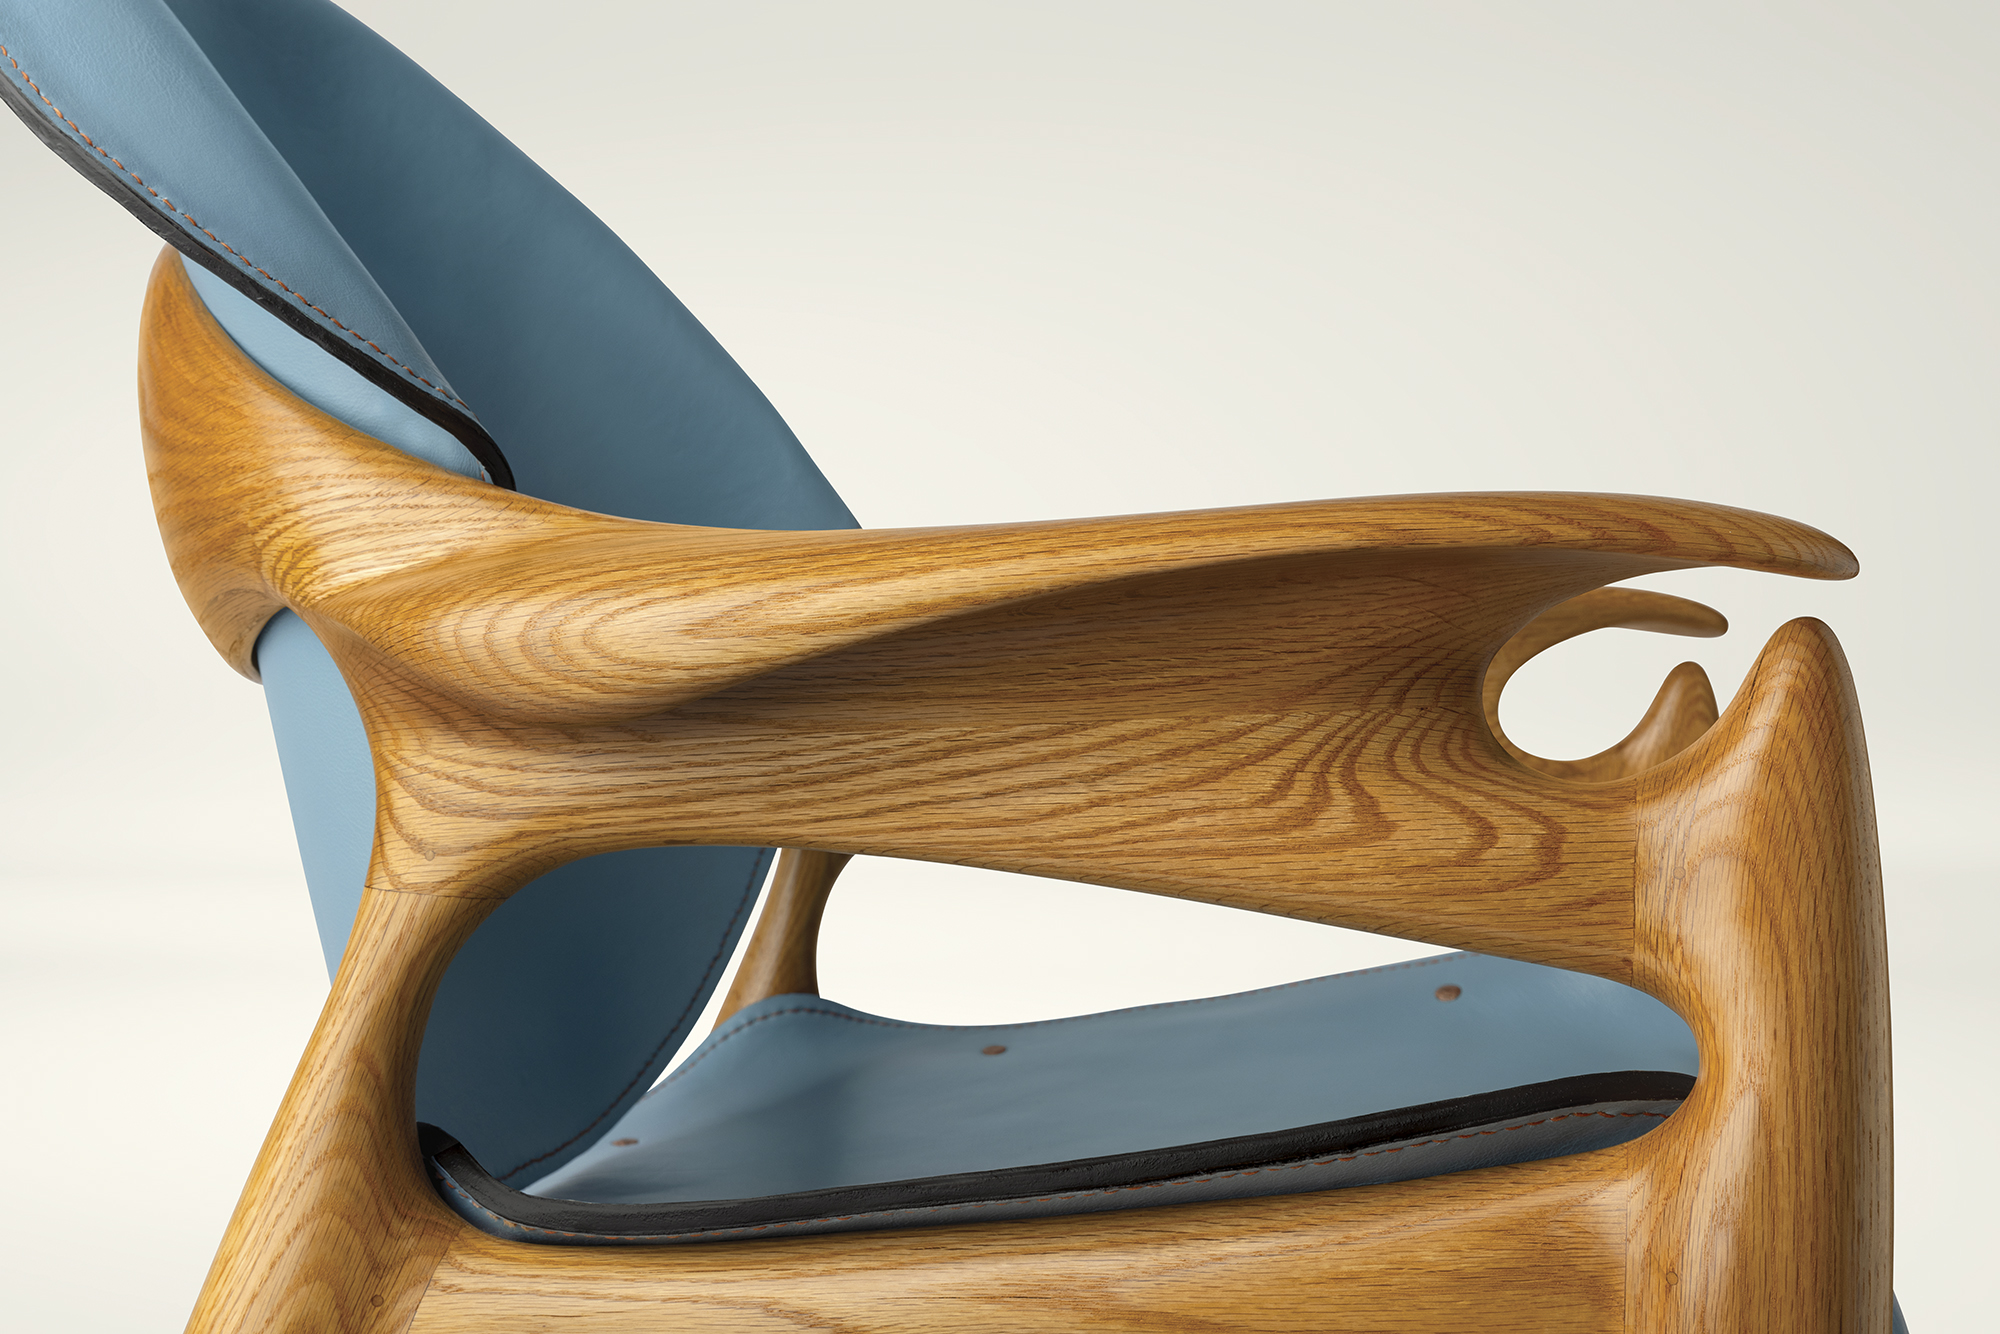 The Fiona Chair, designed by Jonathan Otter and Timberland, to help hurricane relief in Nova Scotia